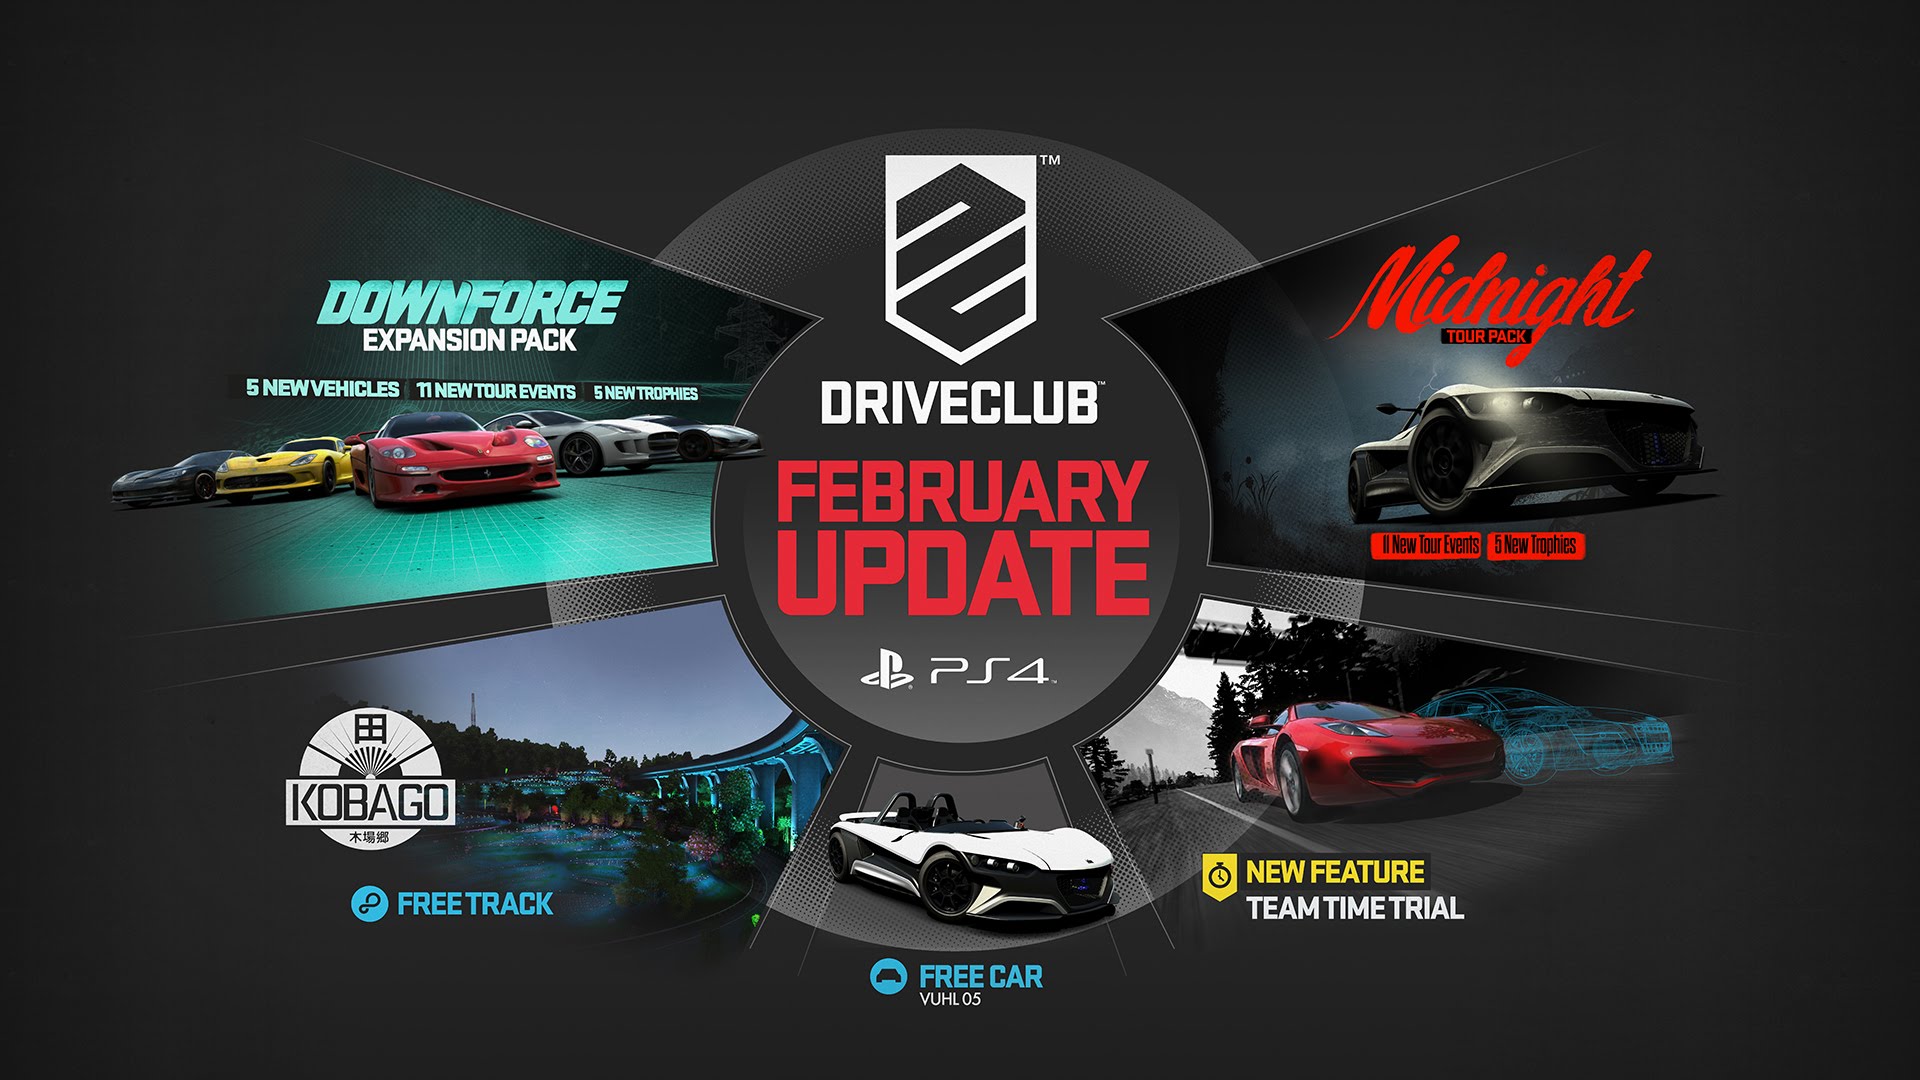 DriveClub February Downforce DLC detailed - VVV